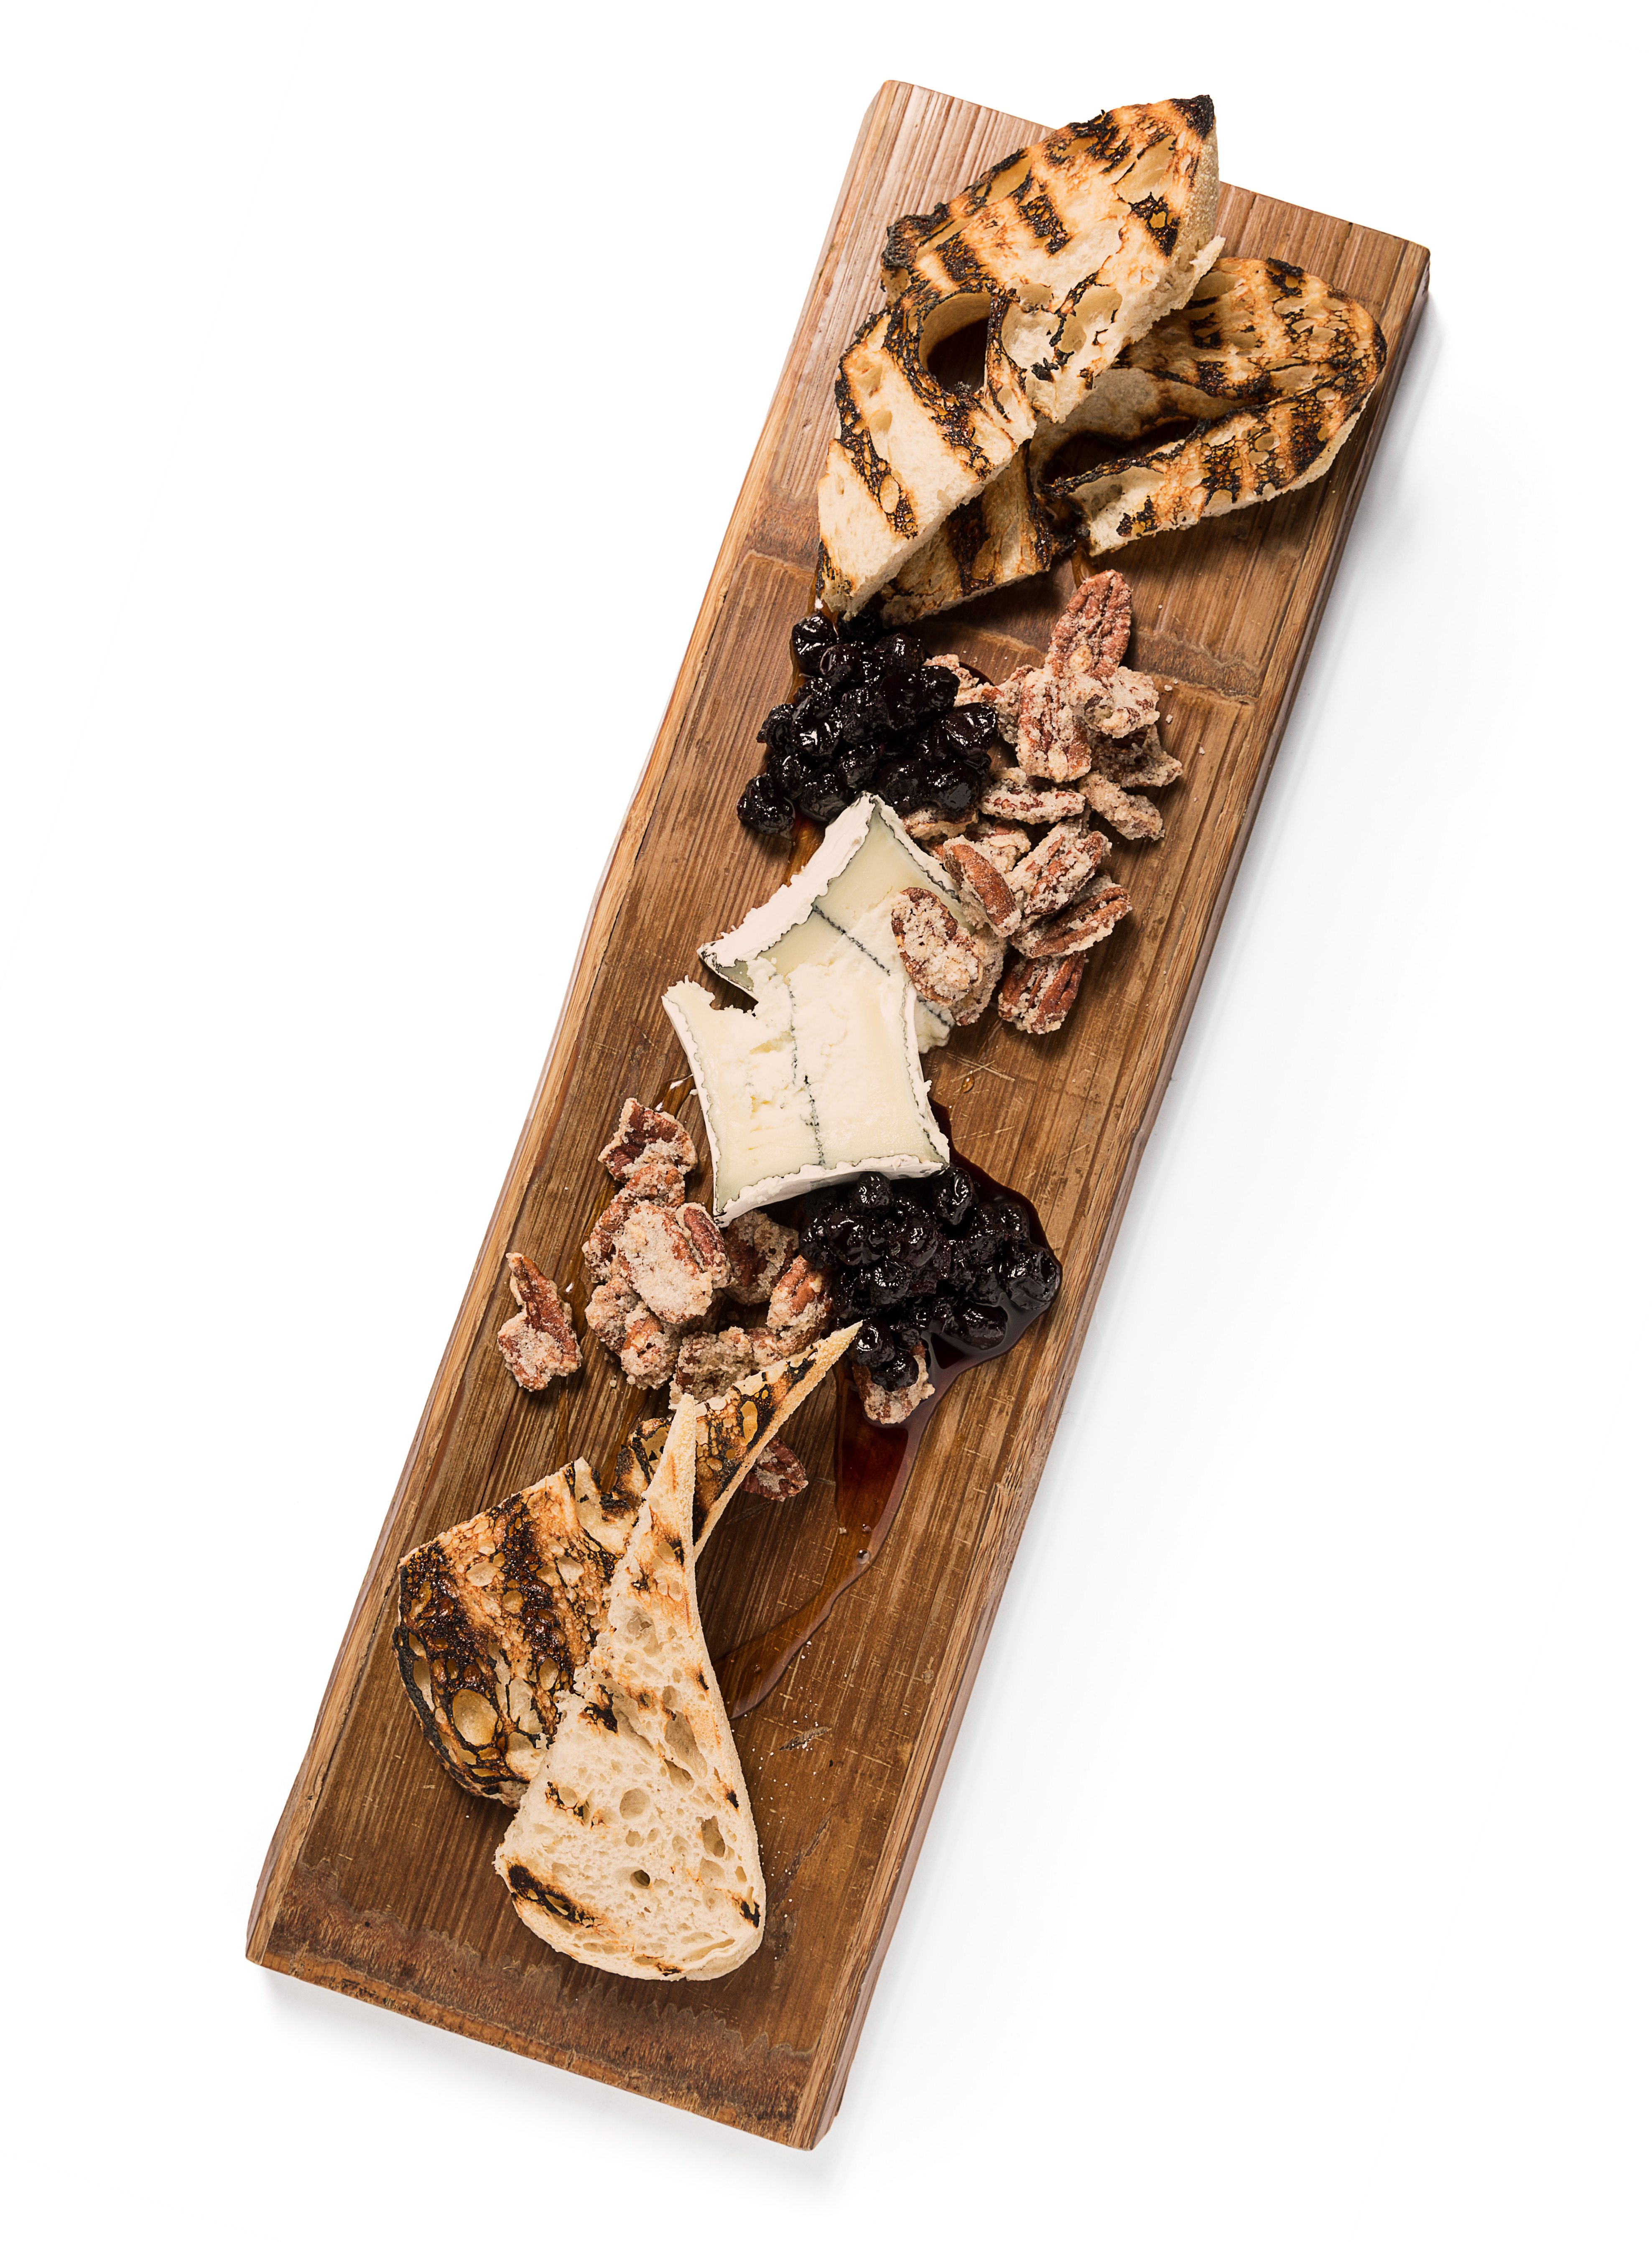 Grilled sourdough, blueberry chutney and honey encircle the cheese board’s centerpiece: Humboldt Fog Goat Cheese.